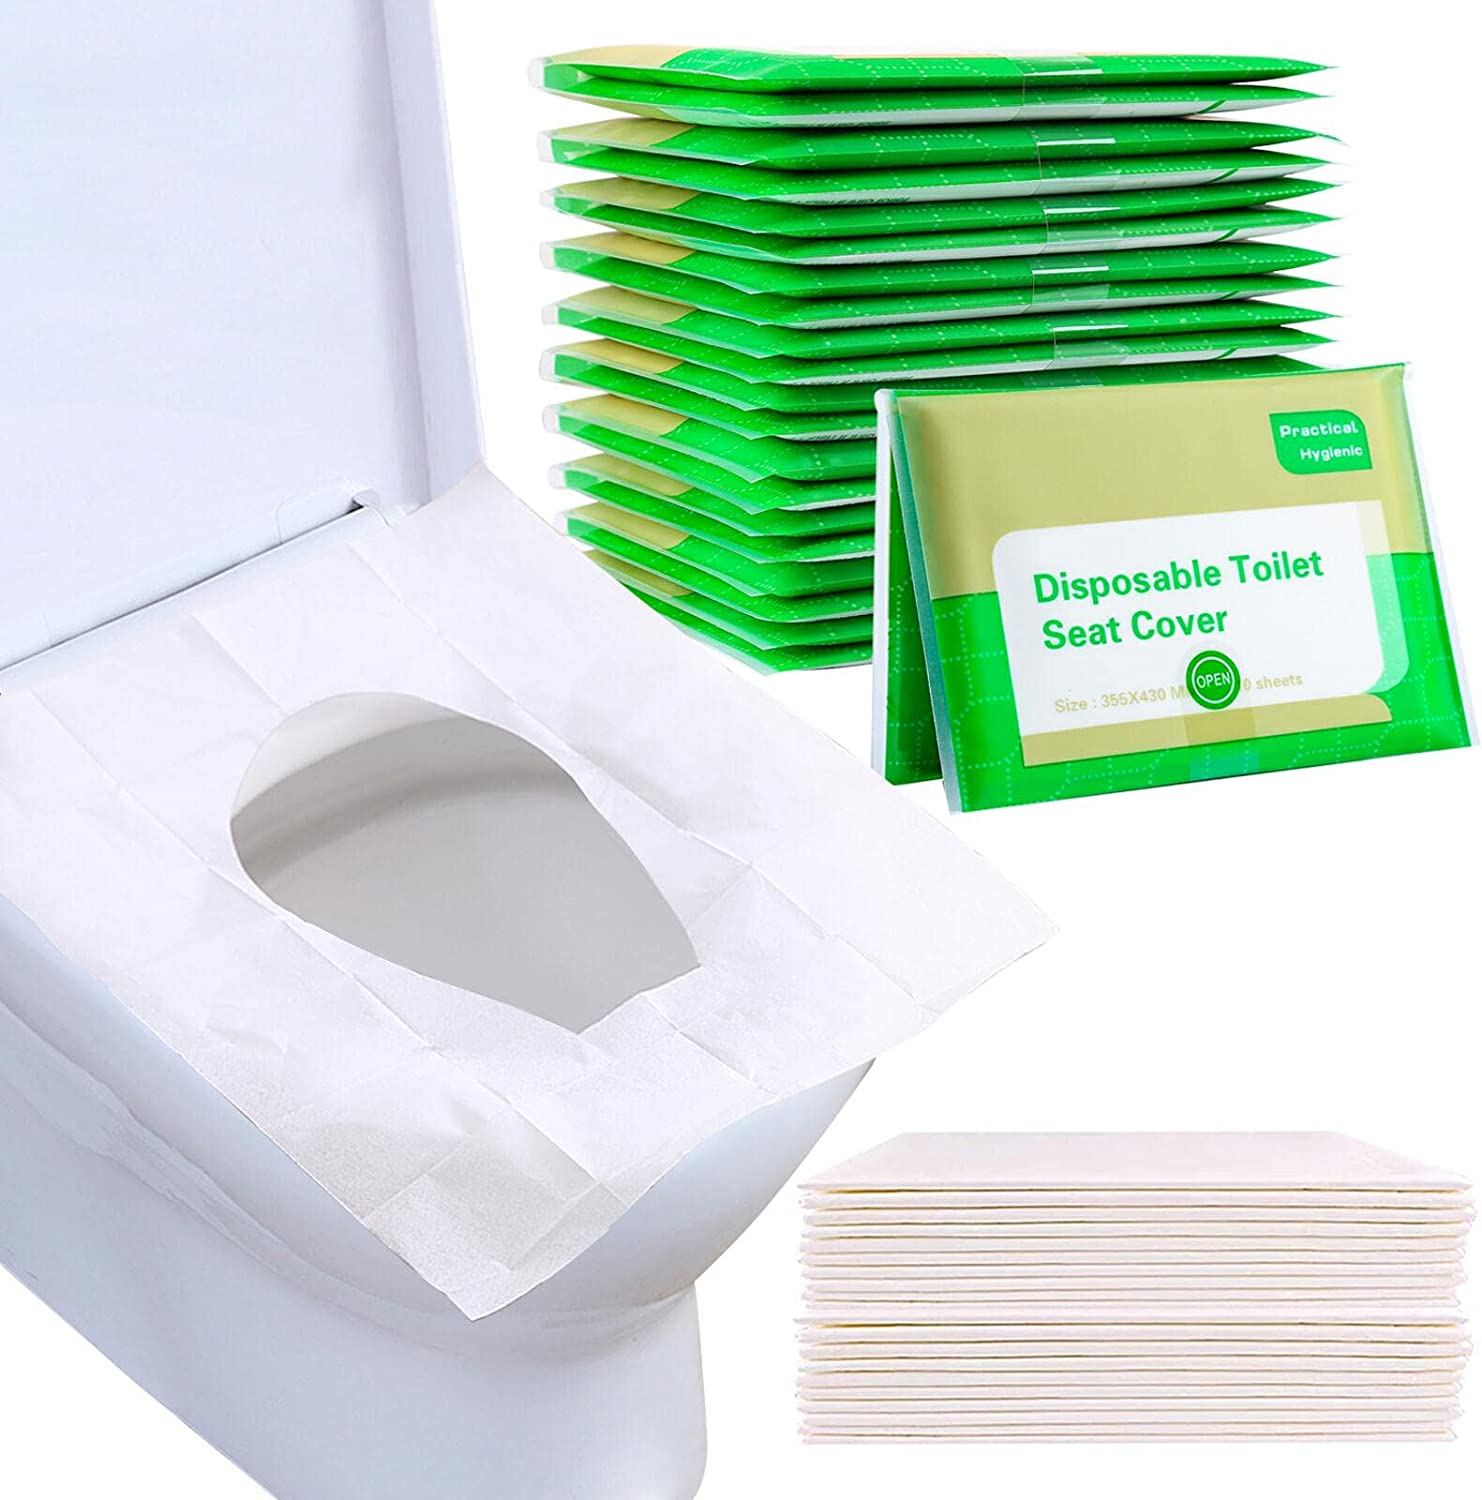 YGDZ Child-Friendly Hygienic Toilet Seat Covers, 110-Pack